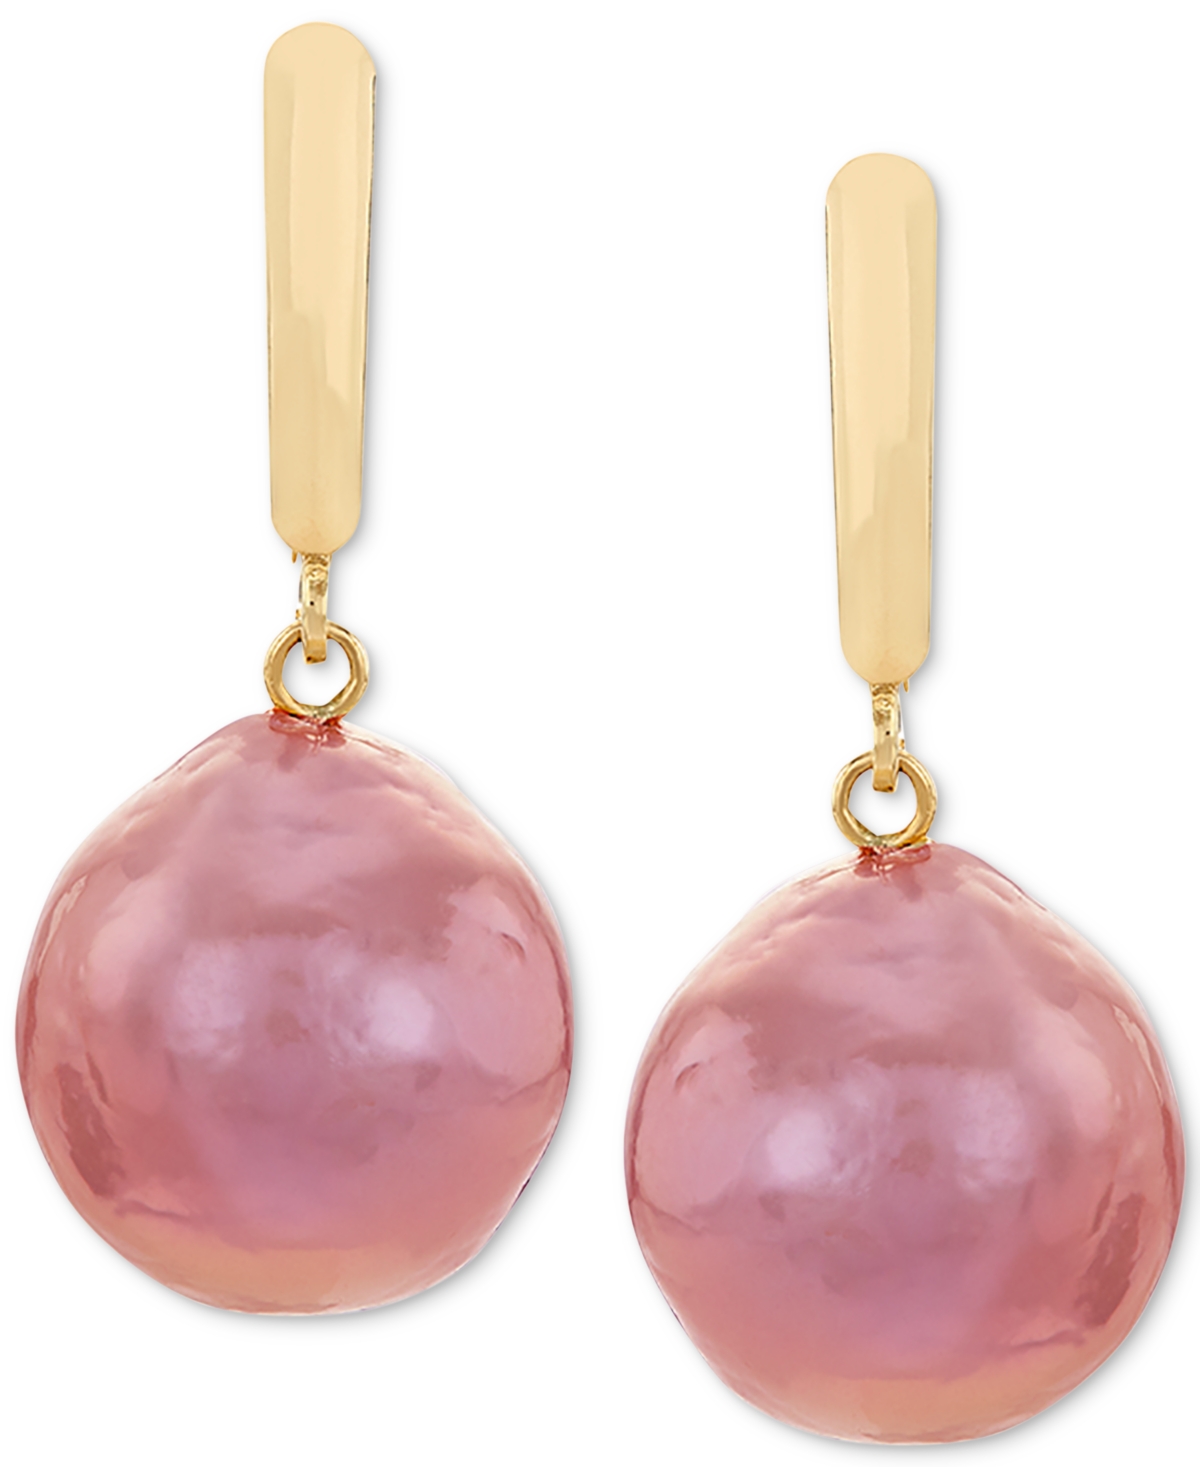 Cultured Pink Ming Pearl (12-14mm) Drop Earrings in 14k Gold - Yellow Gold